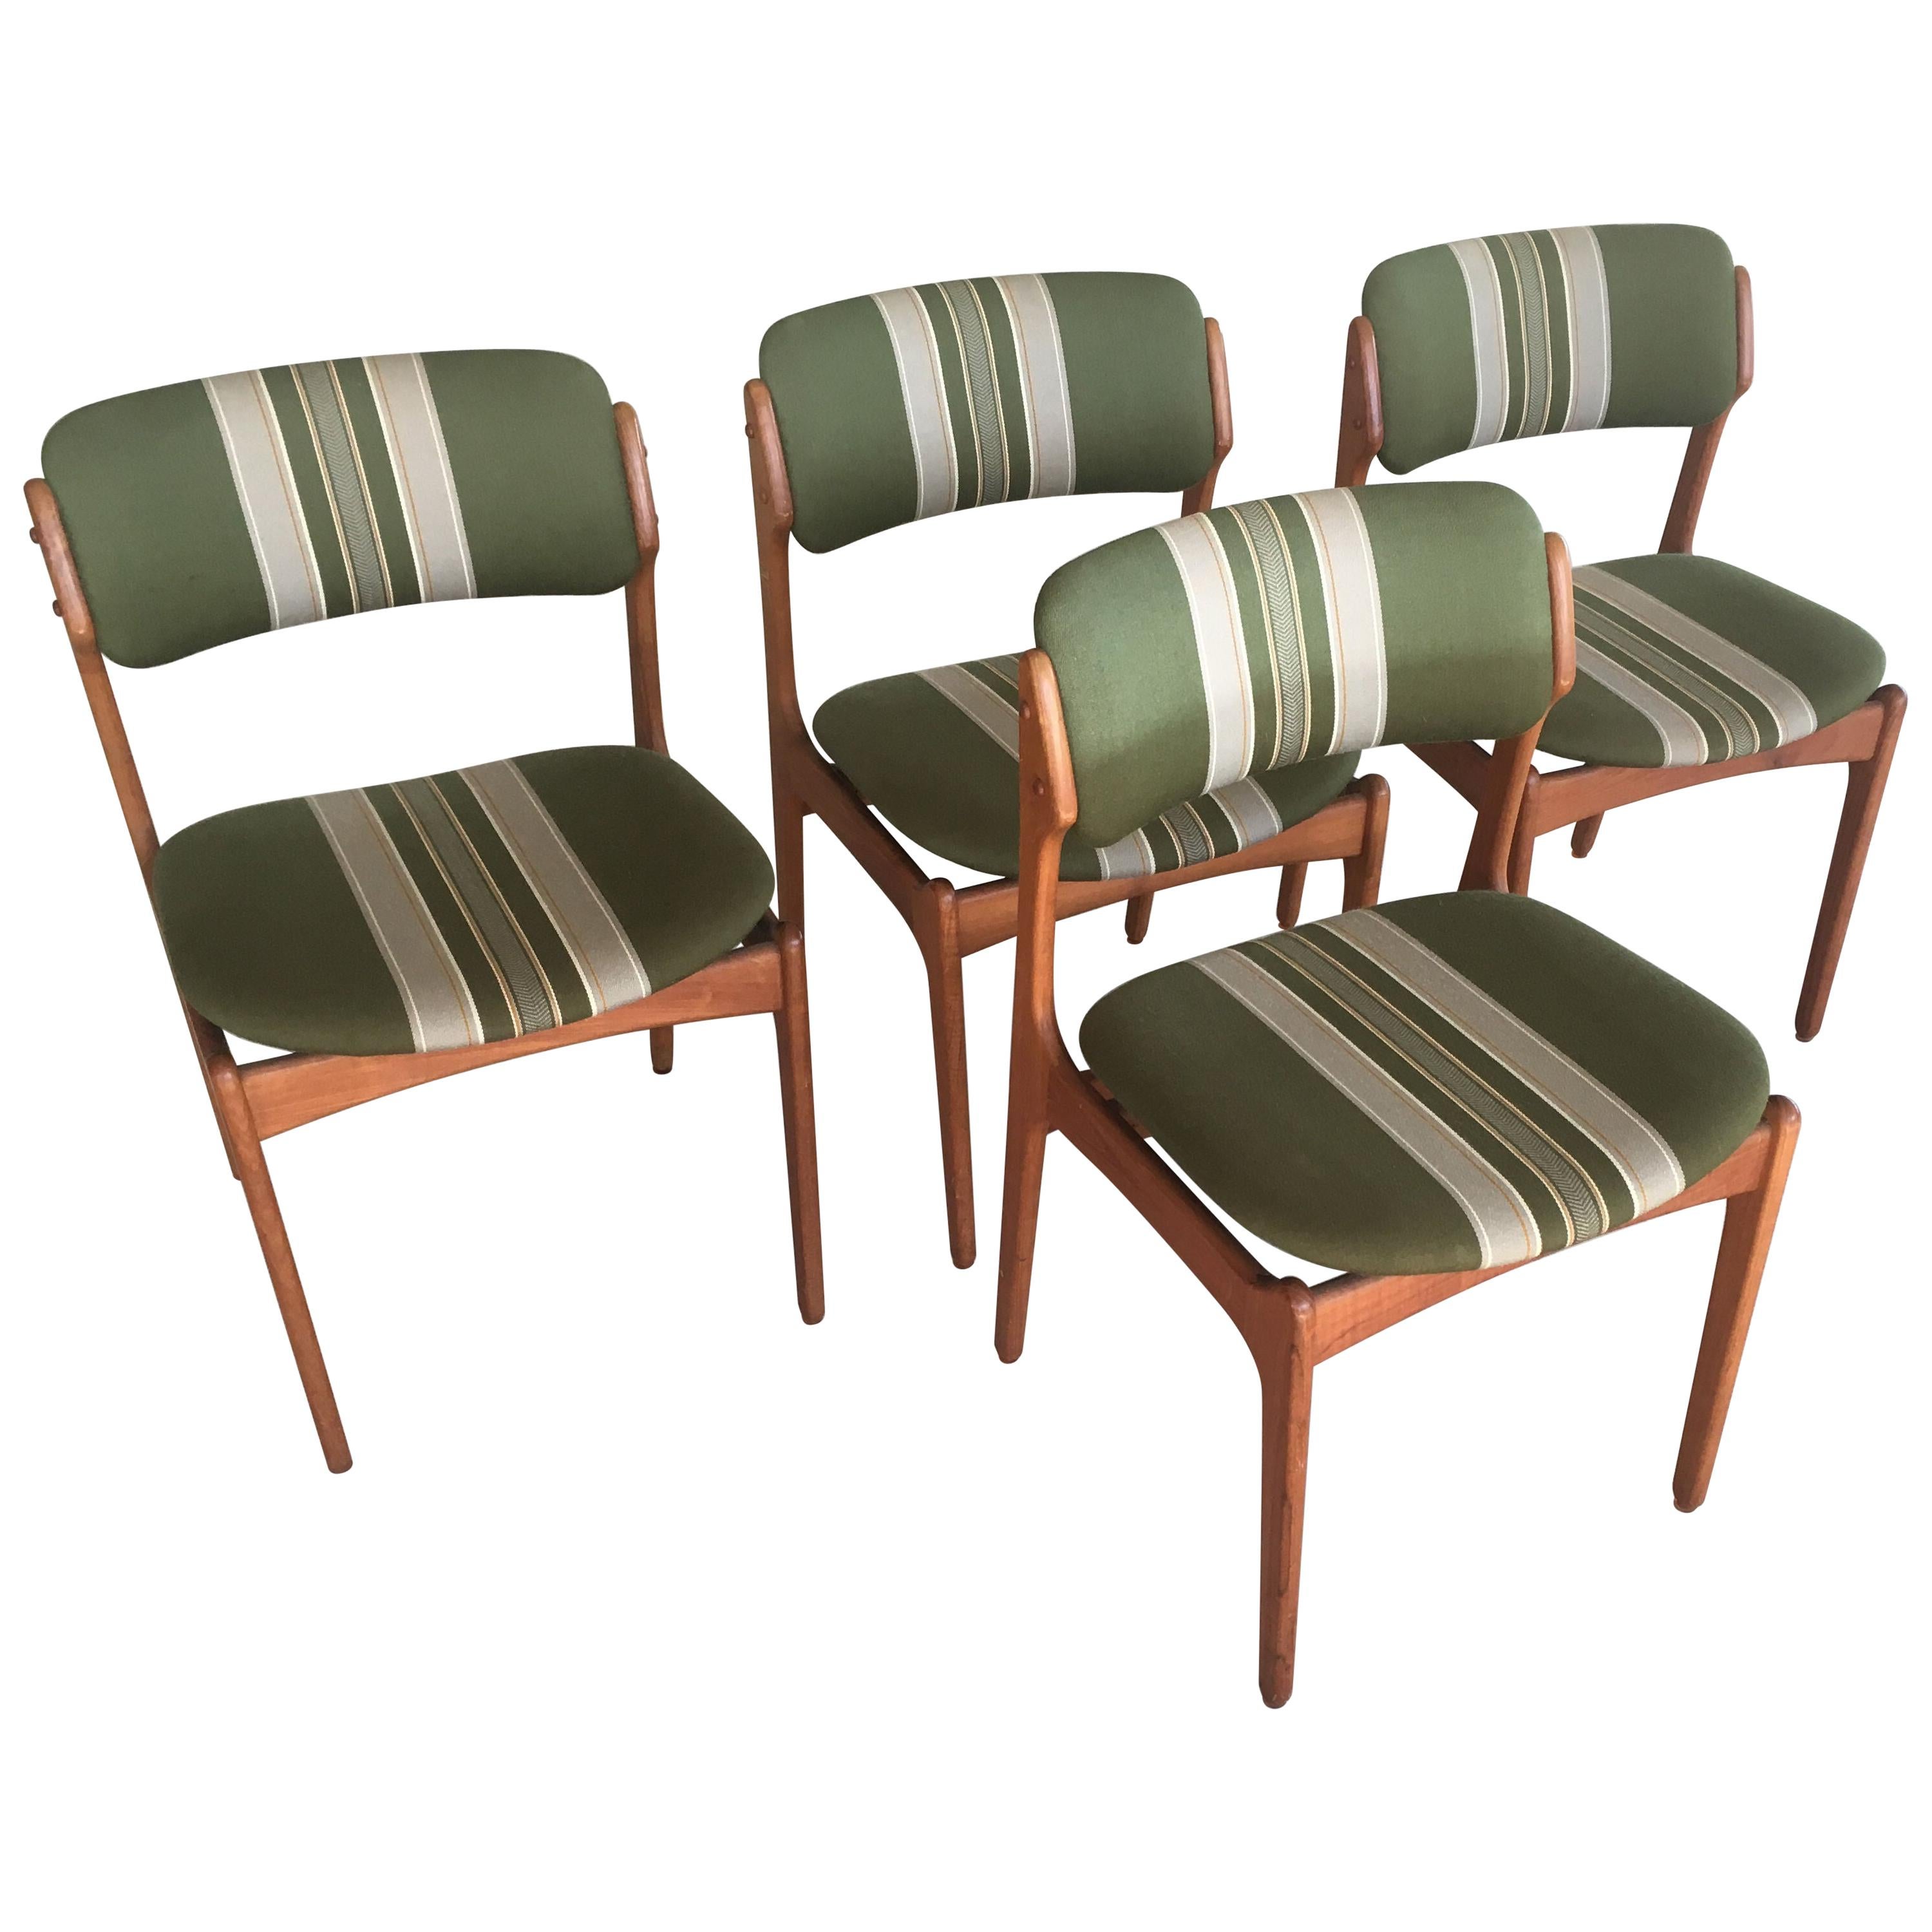 1960s Erik Buch Set of Four Teak Dining Chairs, Inc. Reupholstery